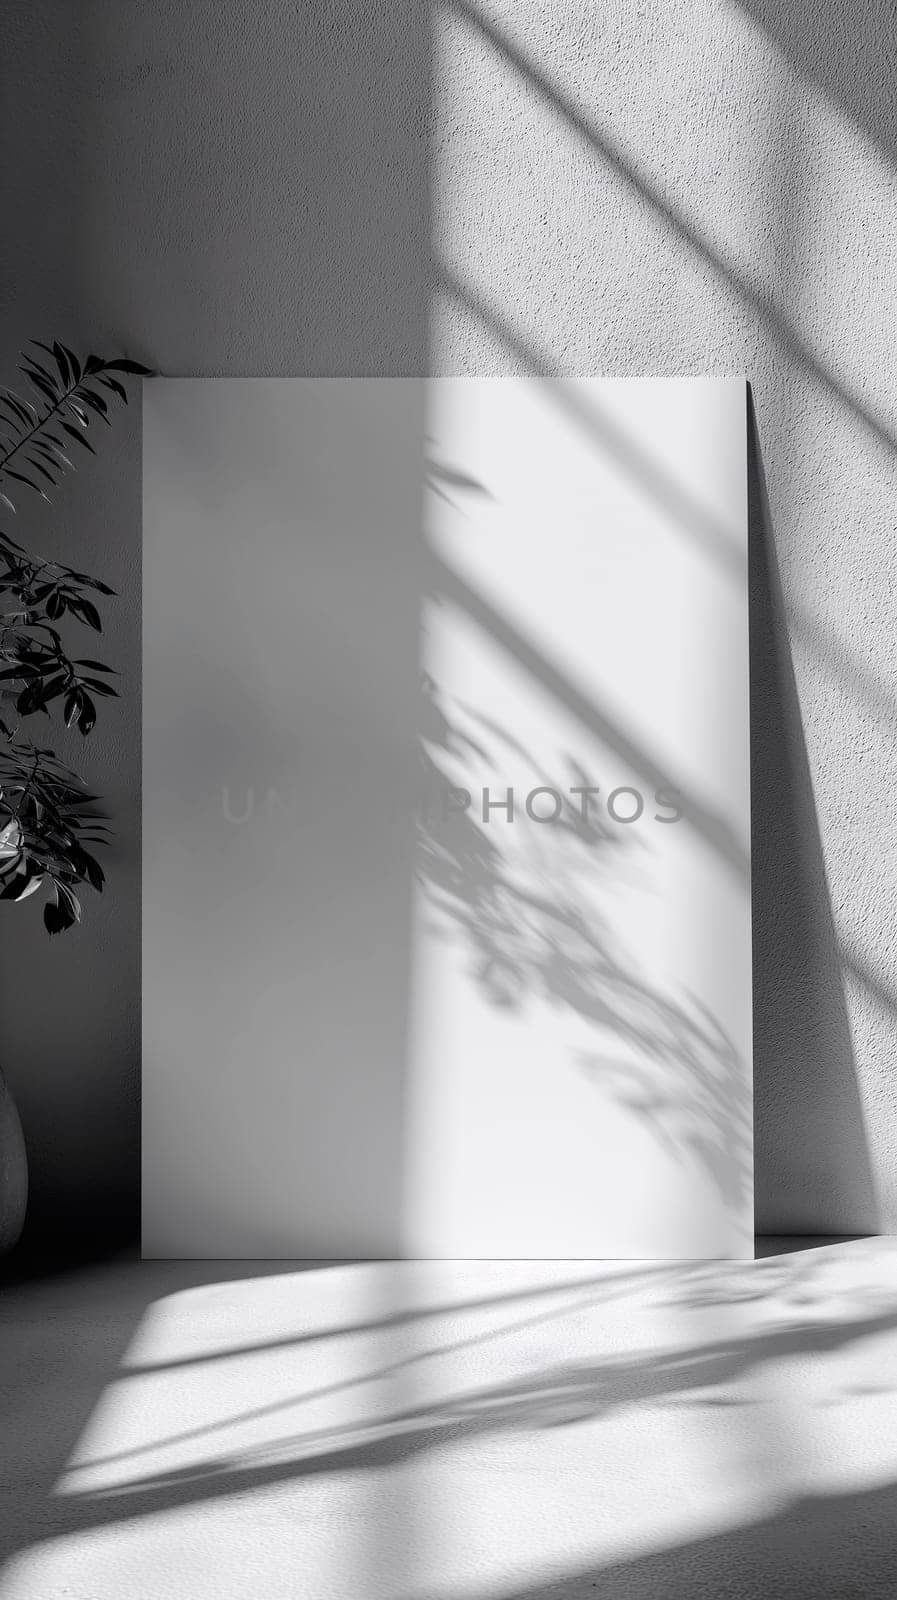 A play of light and shadow creates an abstract design on a blank canvas against a wall, ideal for branding mockups